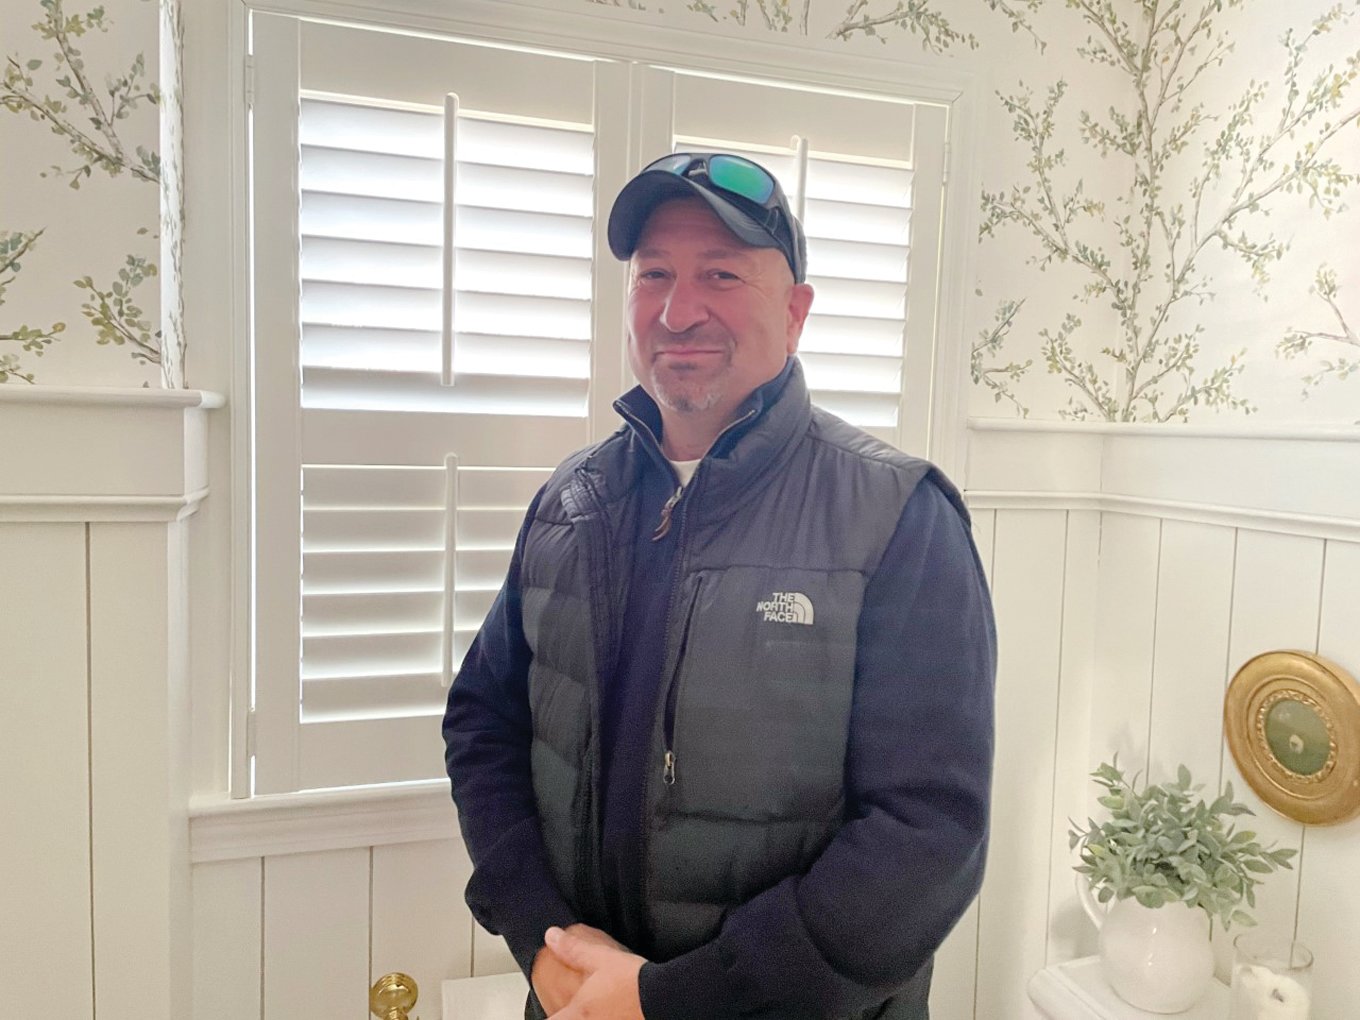 Harris Alkins has been delivering his unique brand of professionalism, humor and dedication for over 30 years.  Call him at Harris Blinds & Shutters today at 401-737-4917 for your free consultation and give your house a mini-makeover this fall!